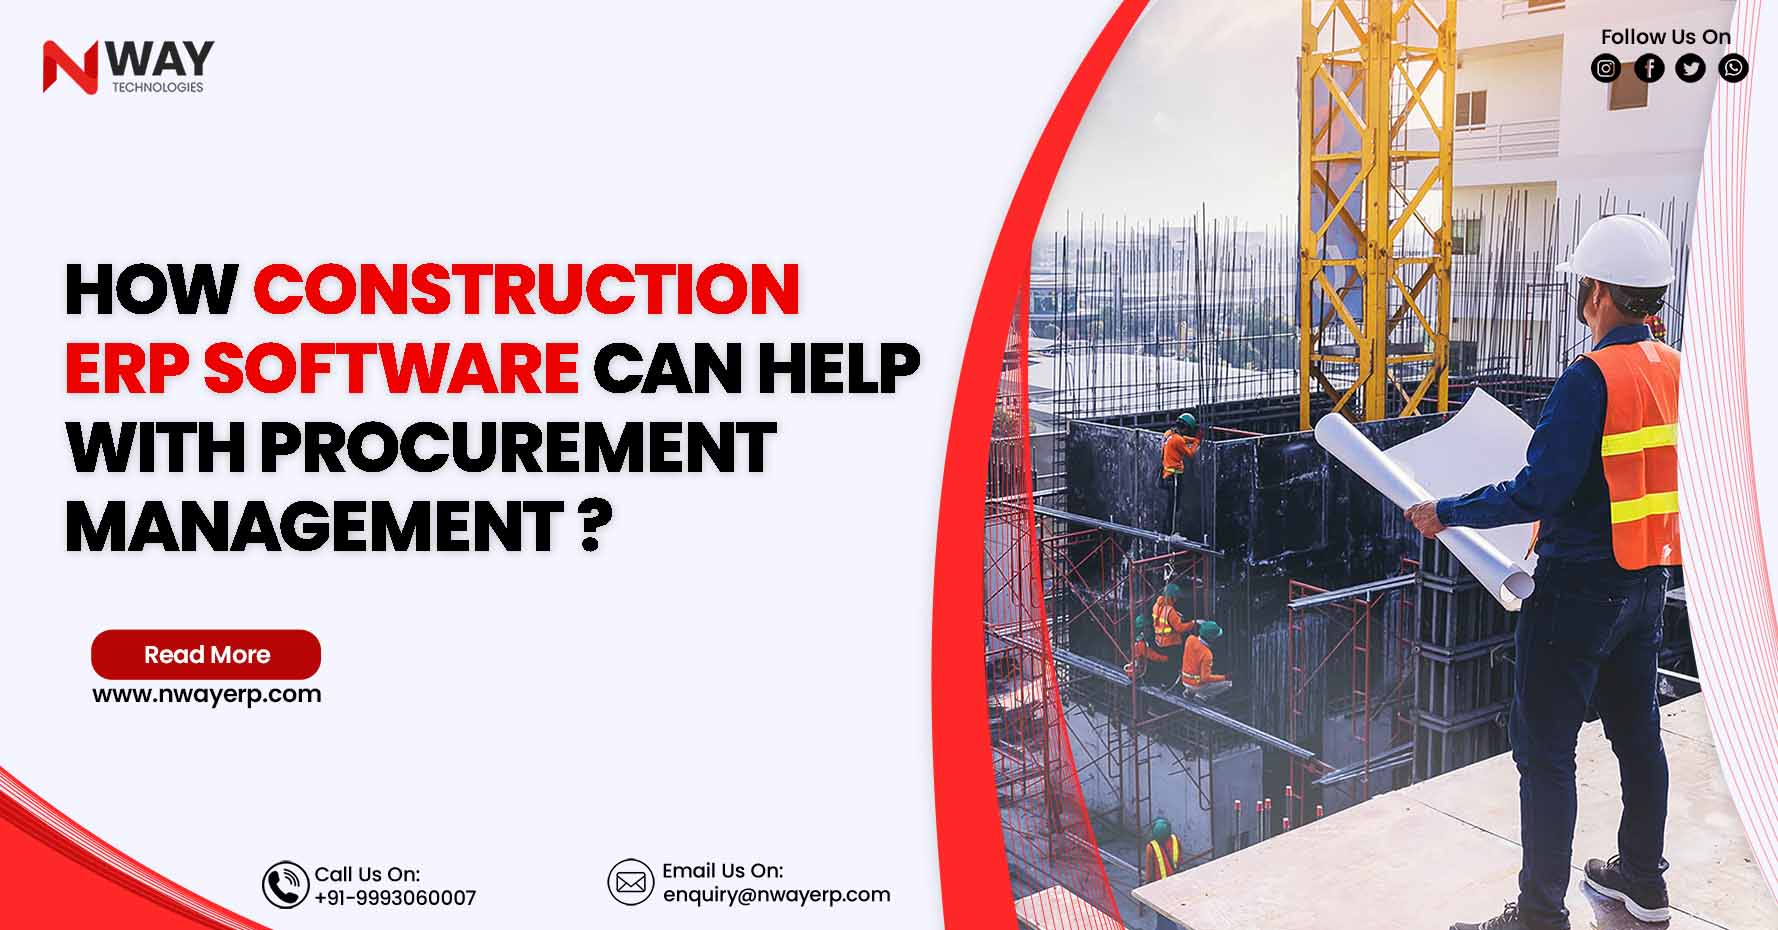 How can Construction ERP Software help with Procurement Management?